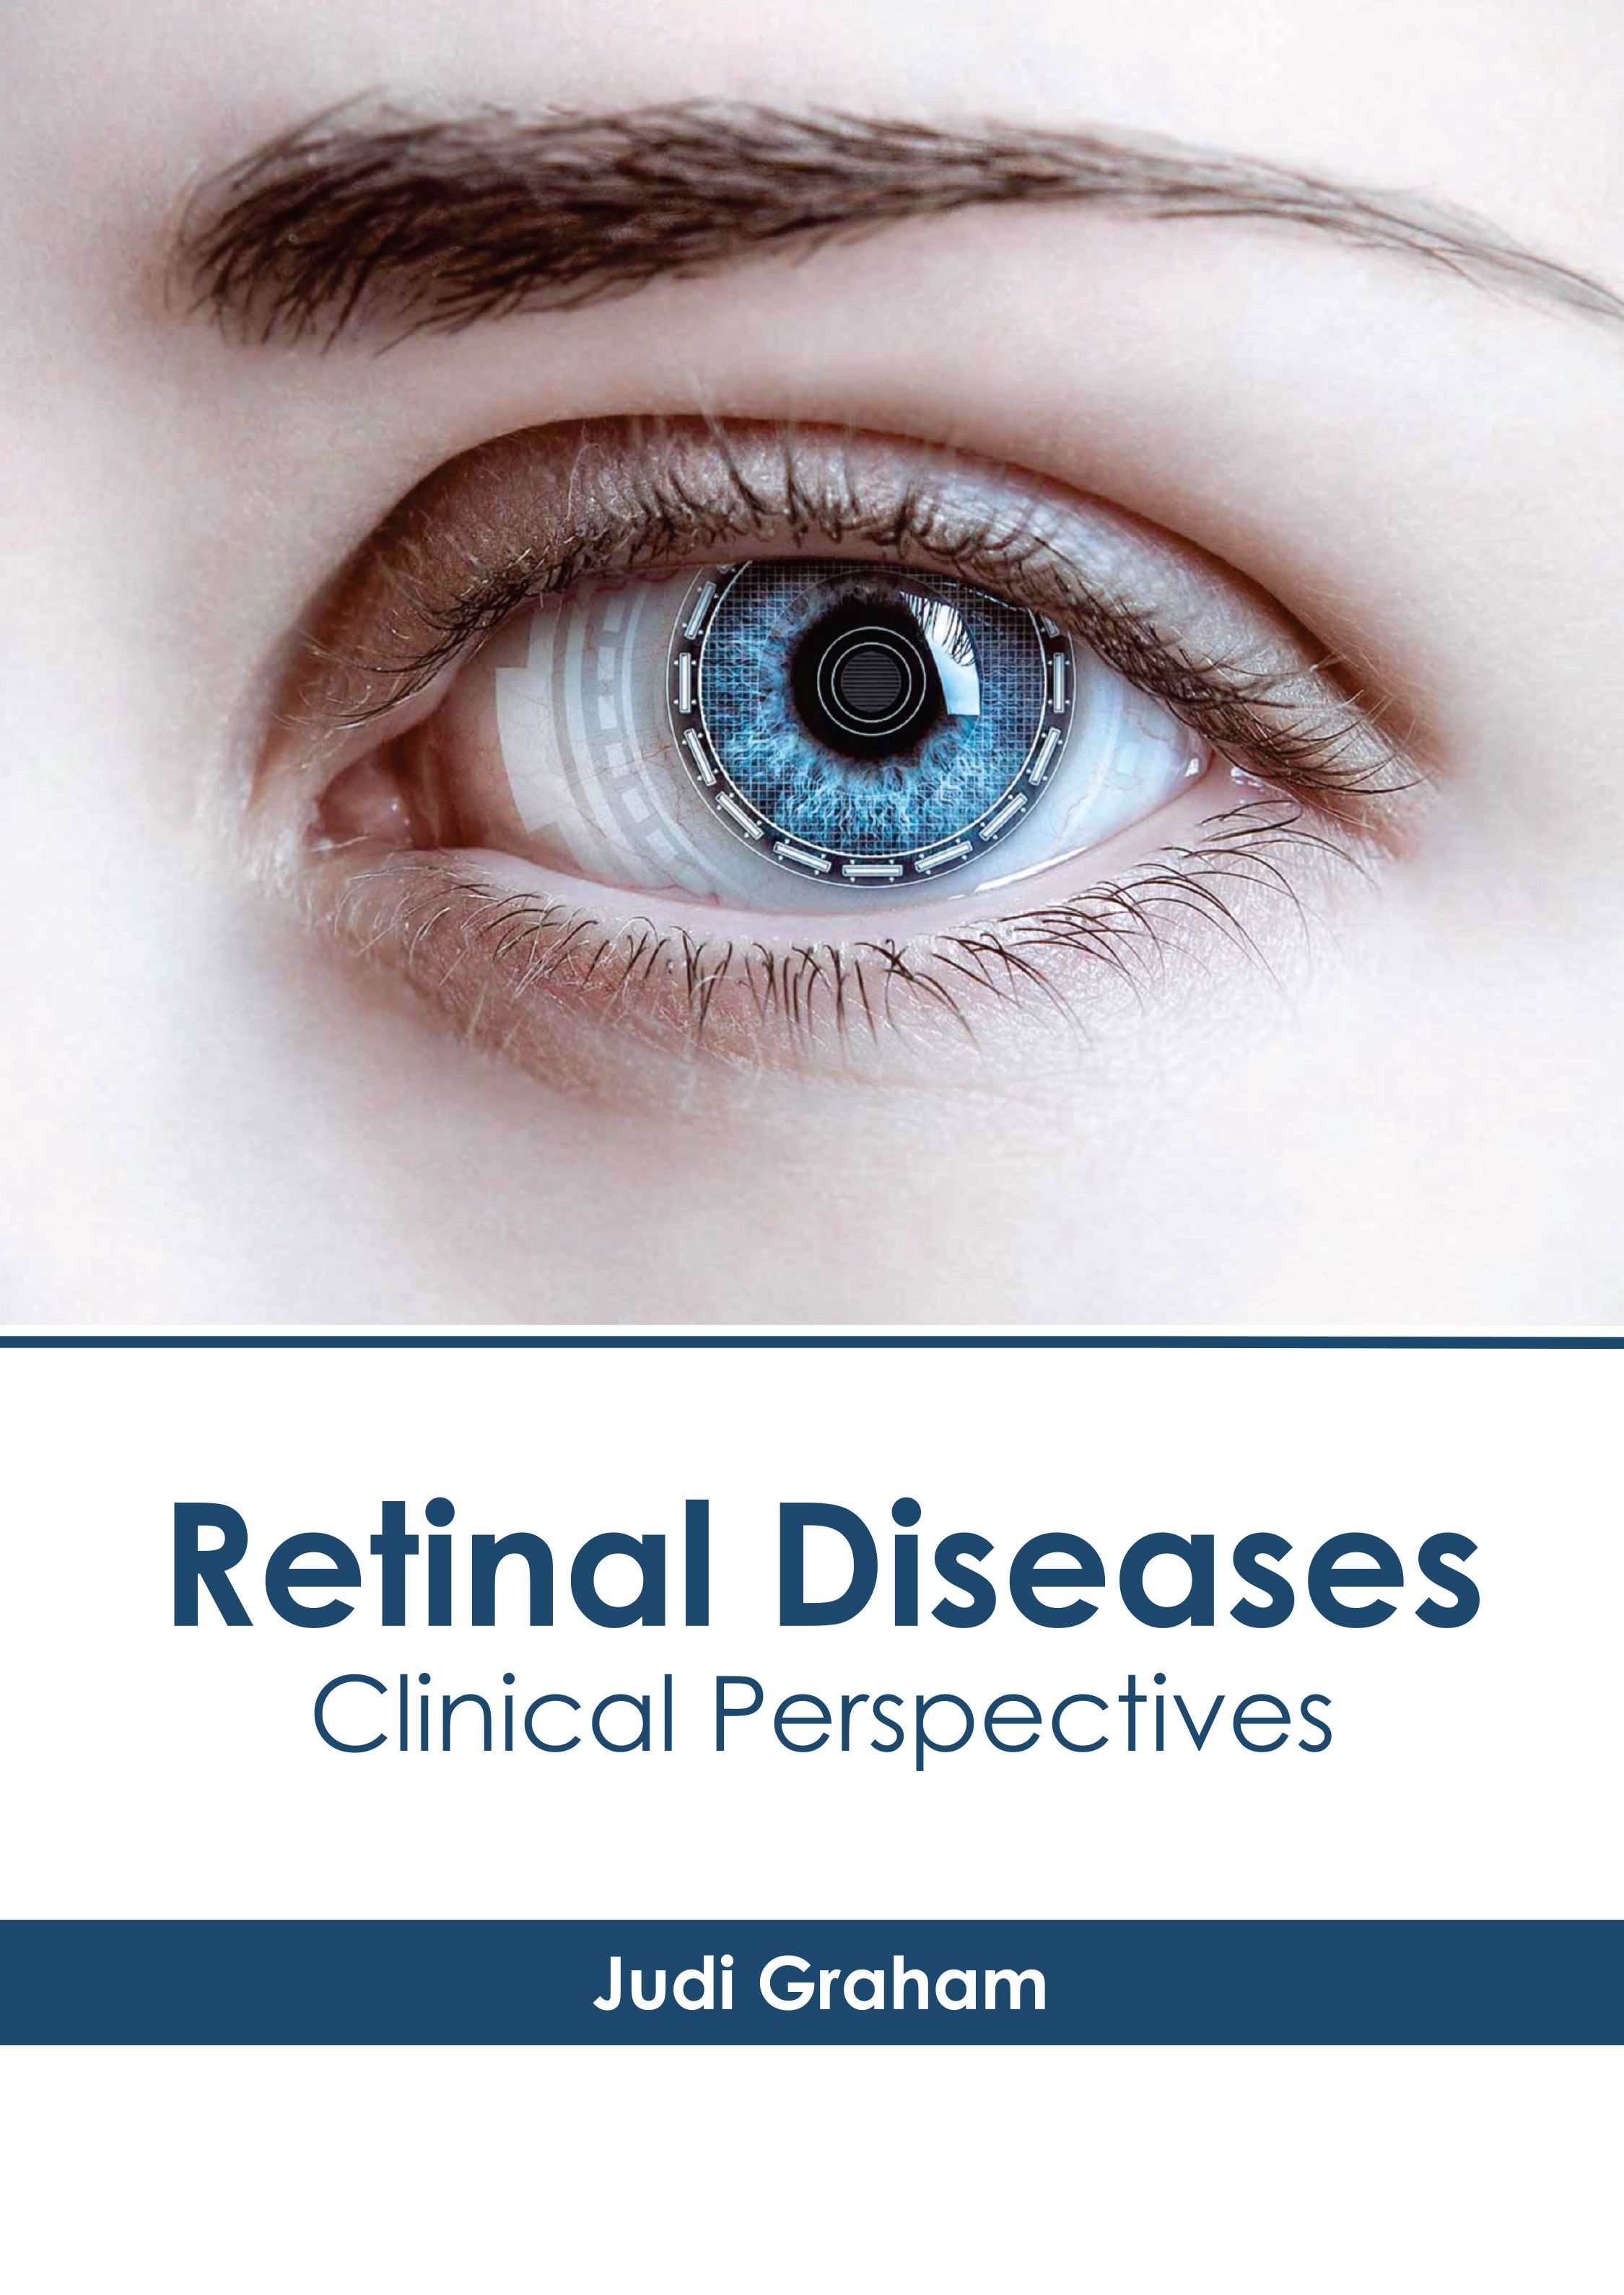 

exclusive-publishers/american-medical-publishers/retinal-diseases-clinical-perspectives-9781639277988